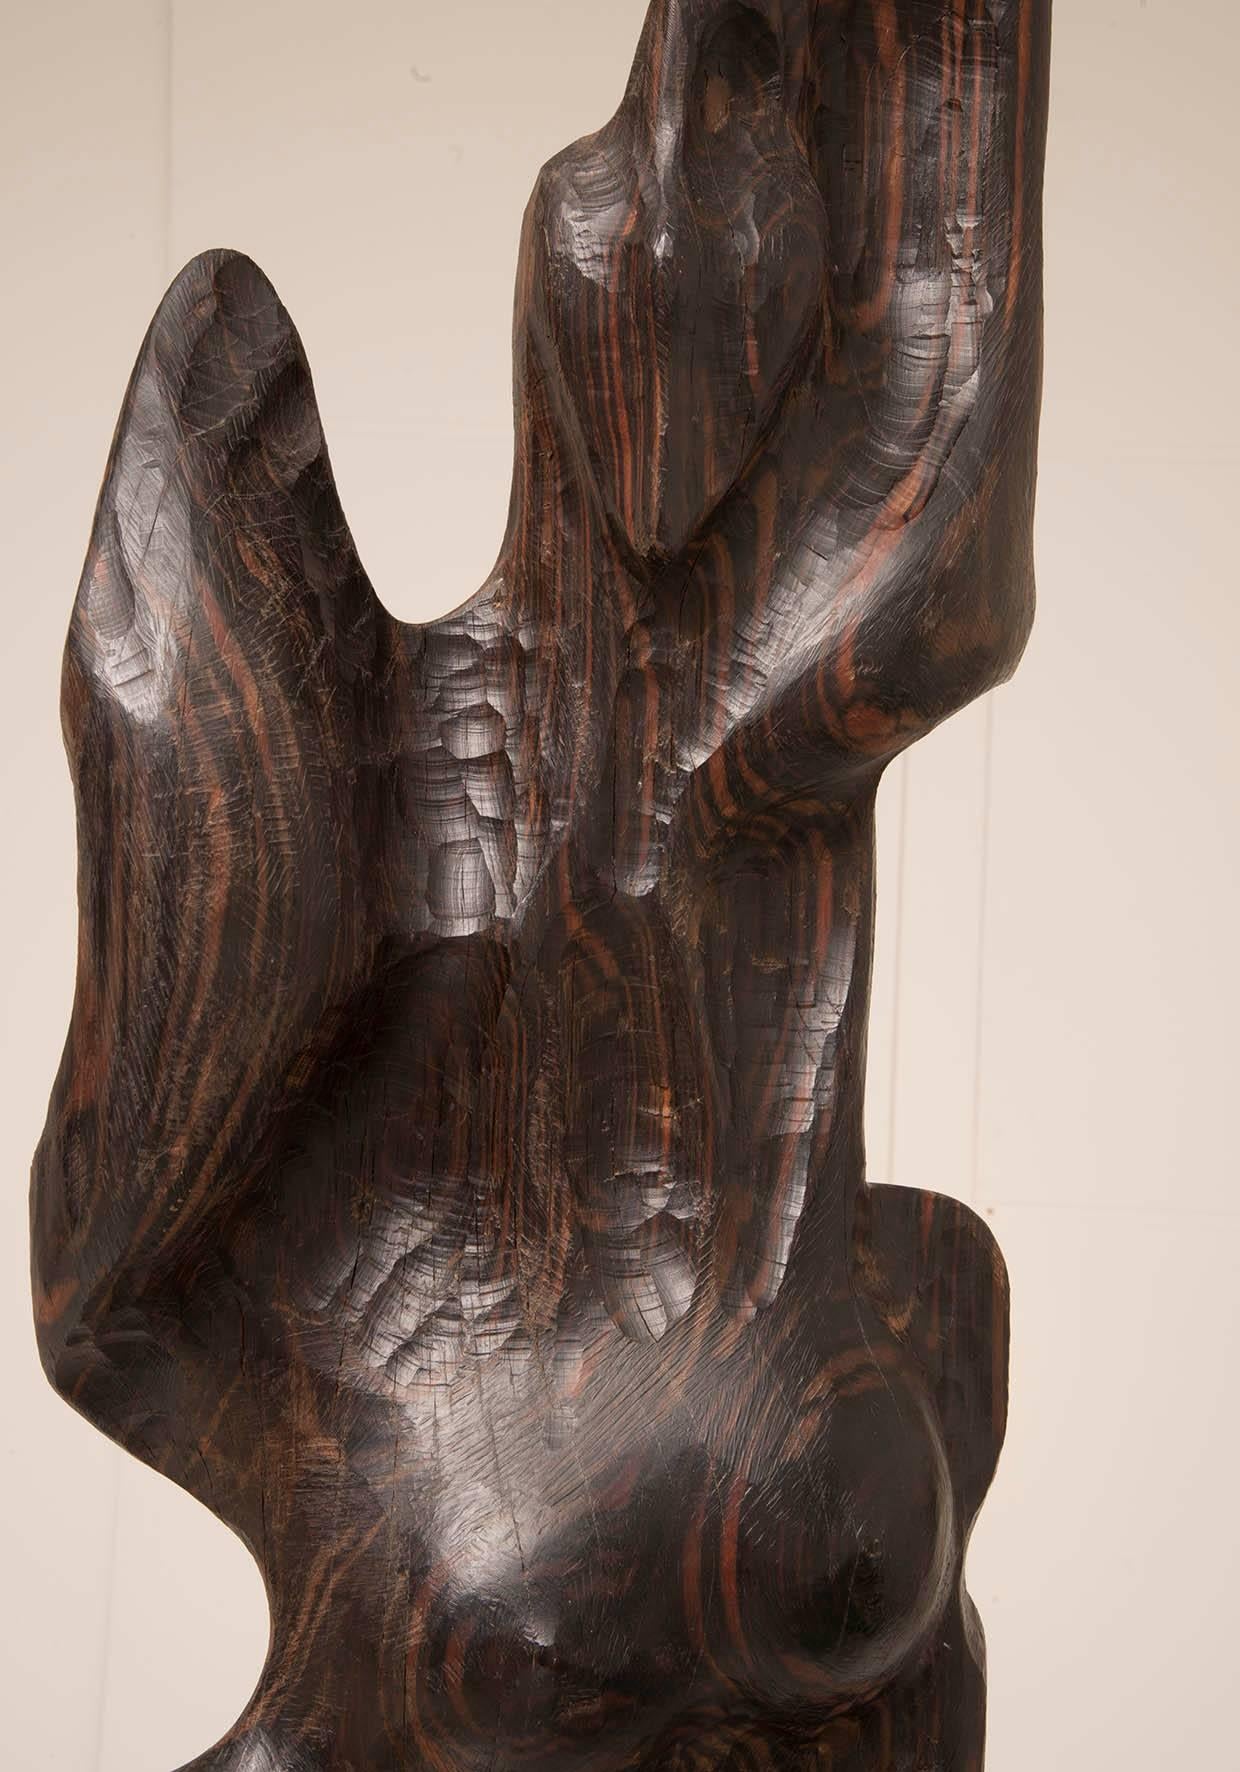 Monumental 1960s Macassar Ebony Sculpture In Excellent Condition For Sale In Brussels, BE